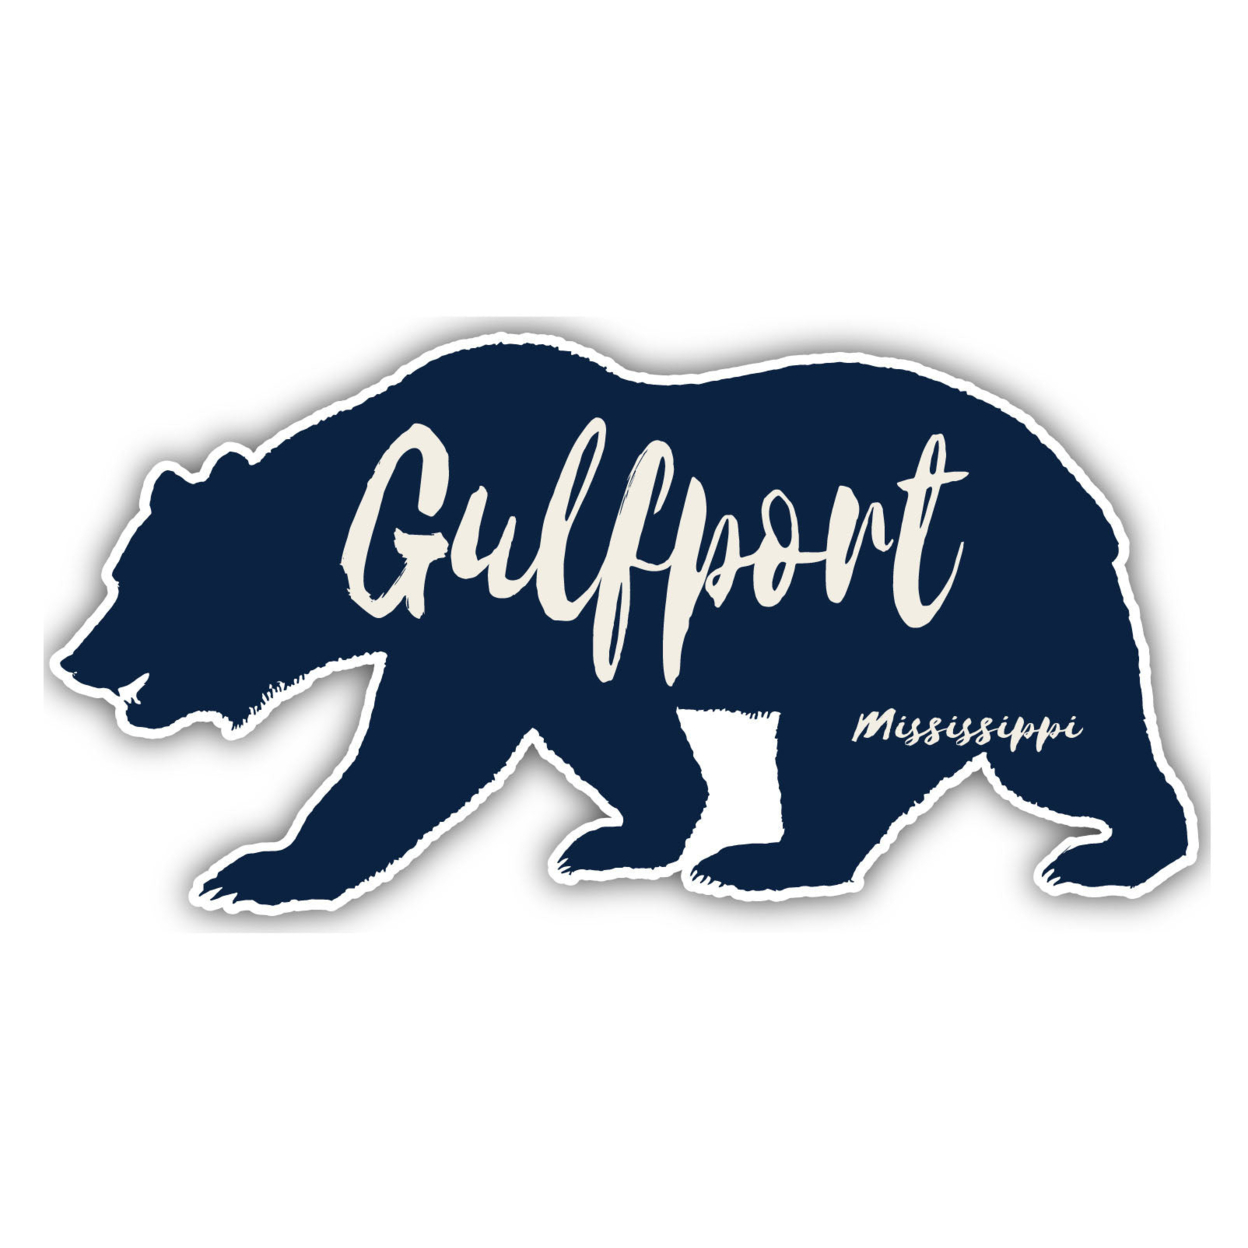 Gulfport Mississippi Souvenir Decorative Stickers (Choose Theme And Size) - Single Unit, 8-Inch, Bear